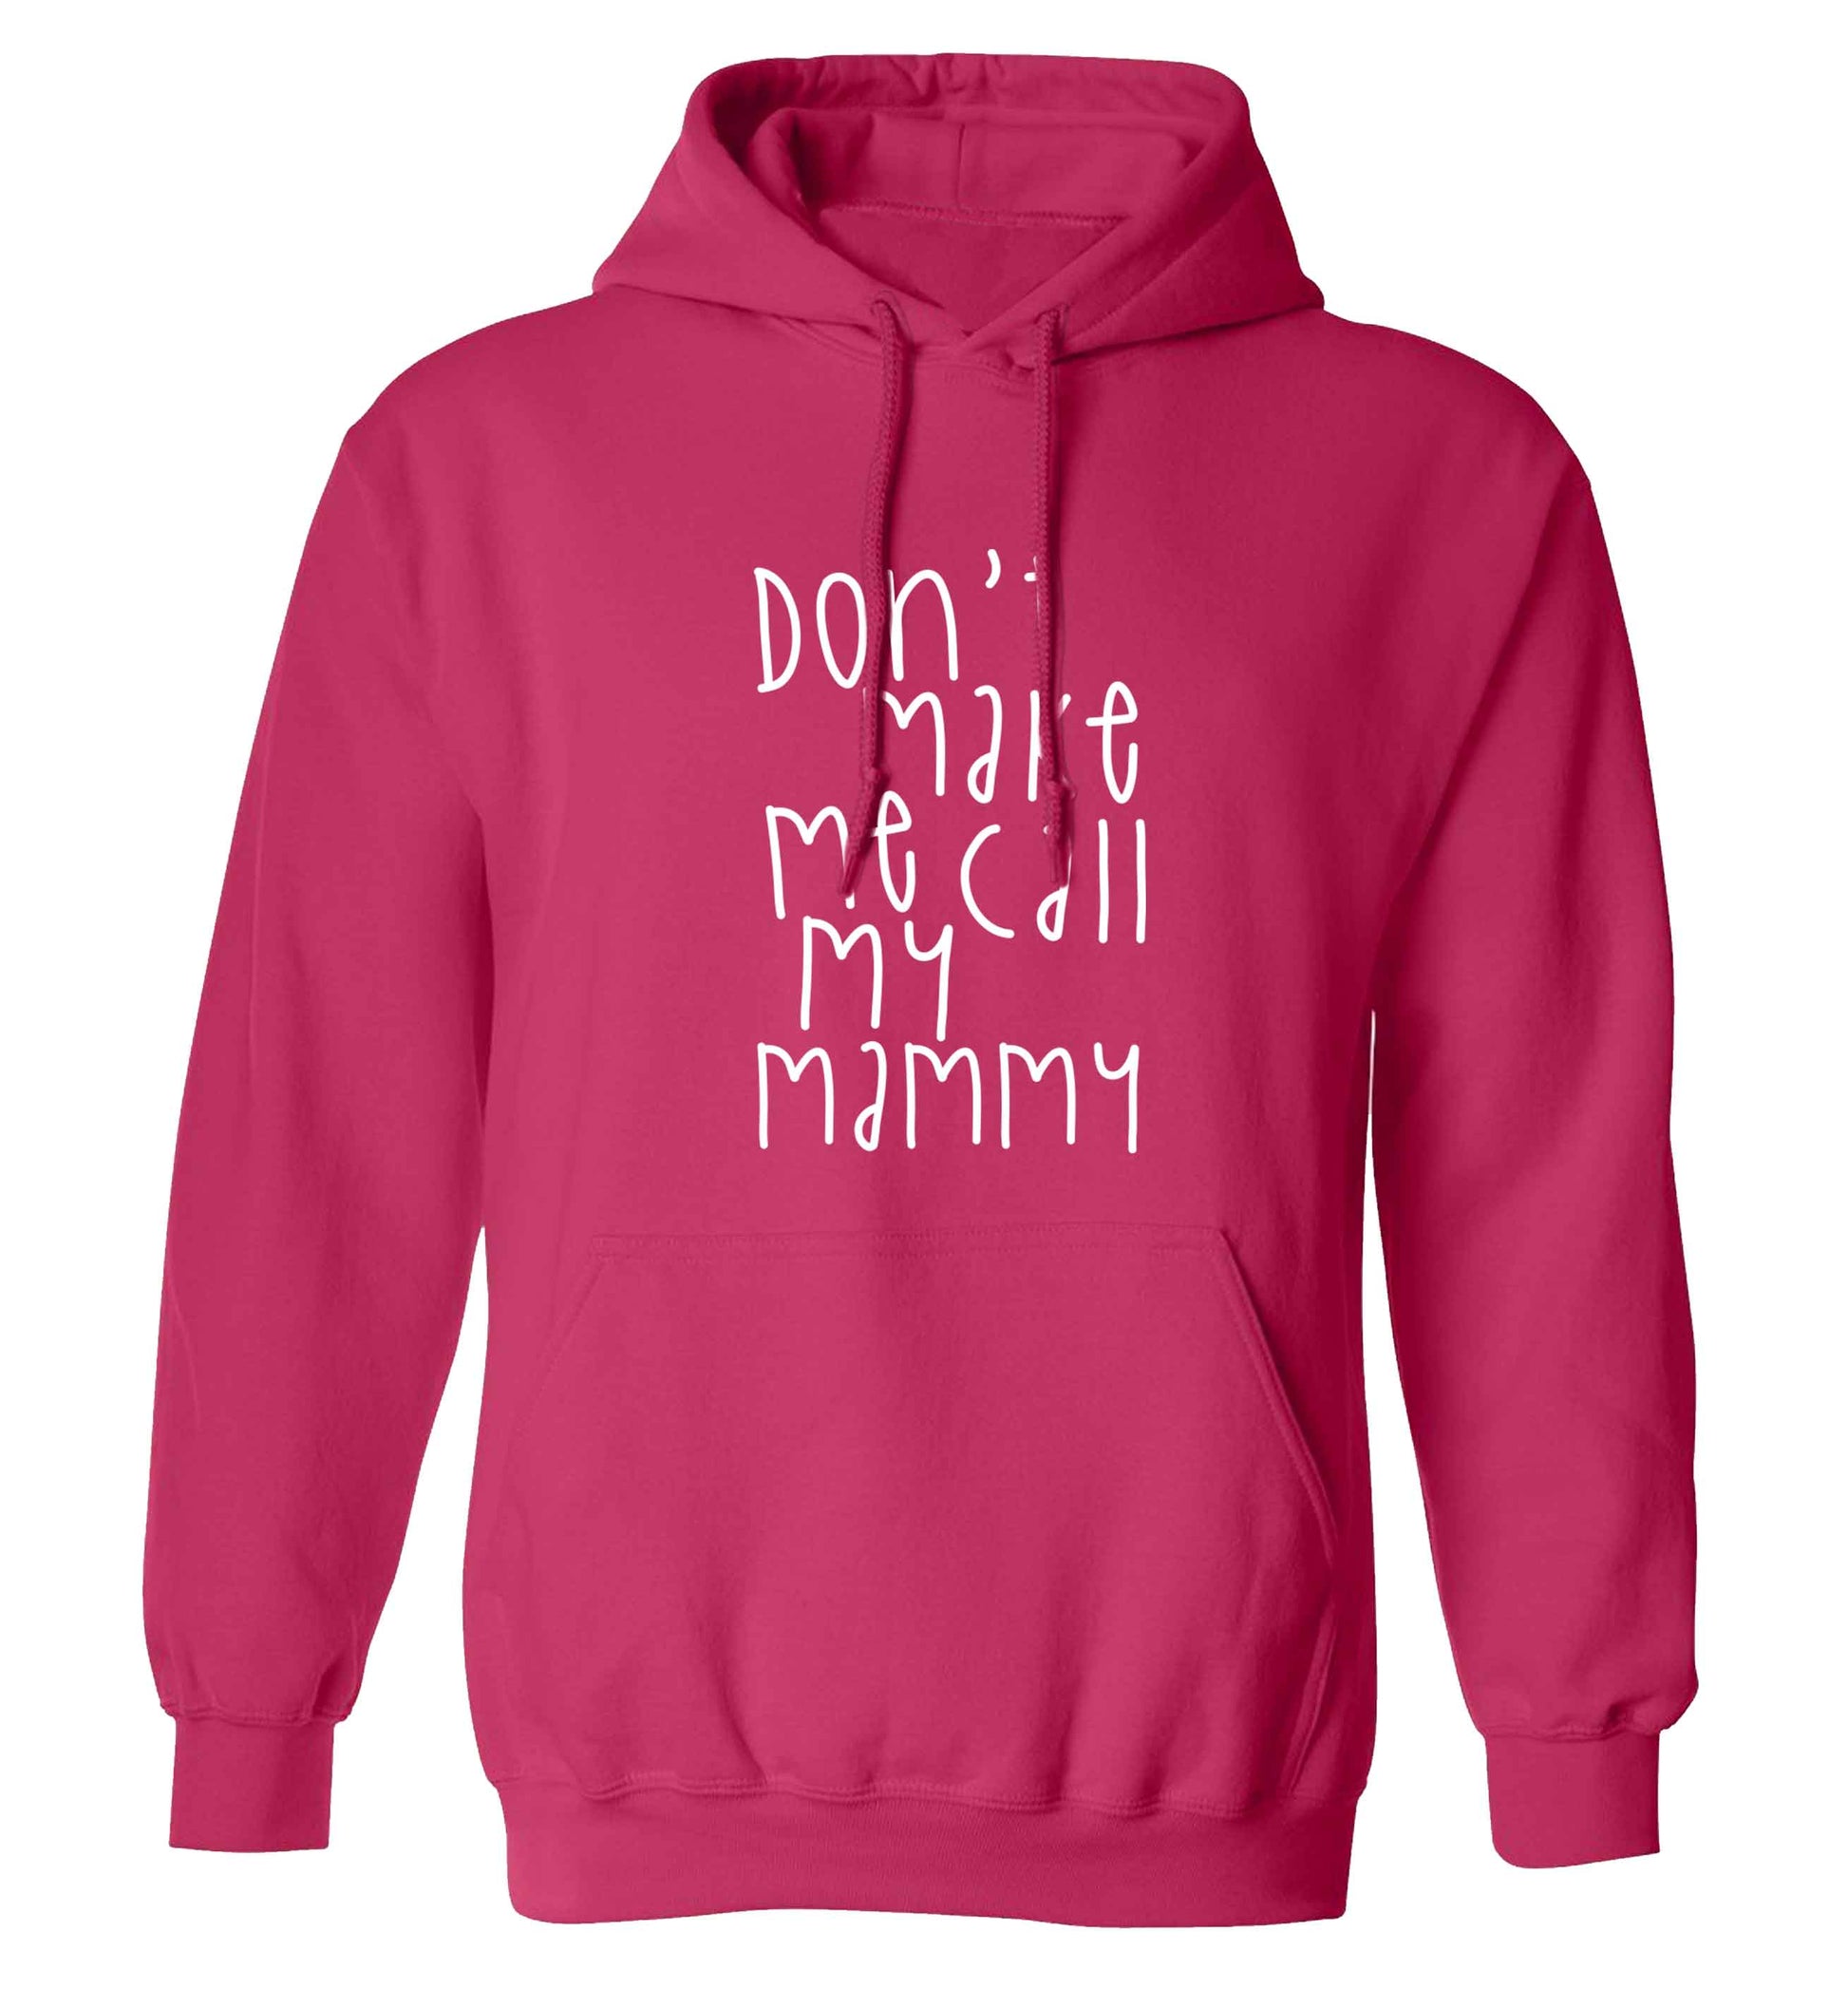 Don't make me call my mammy adults unisex pink hoodie 2XL